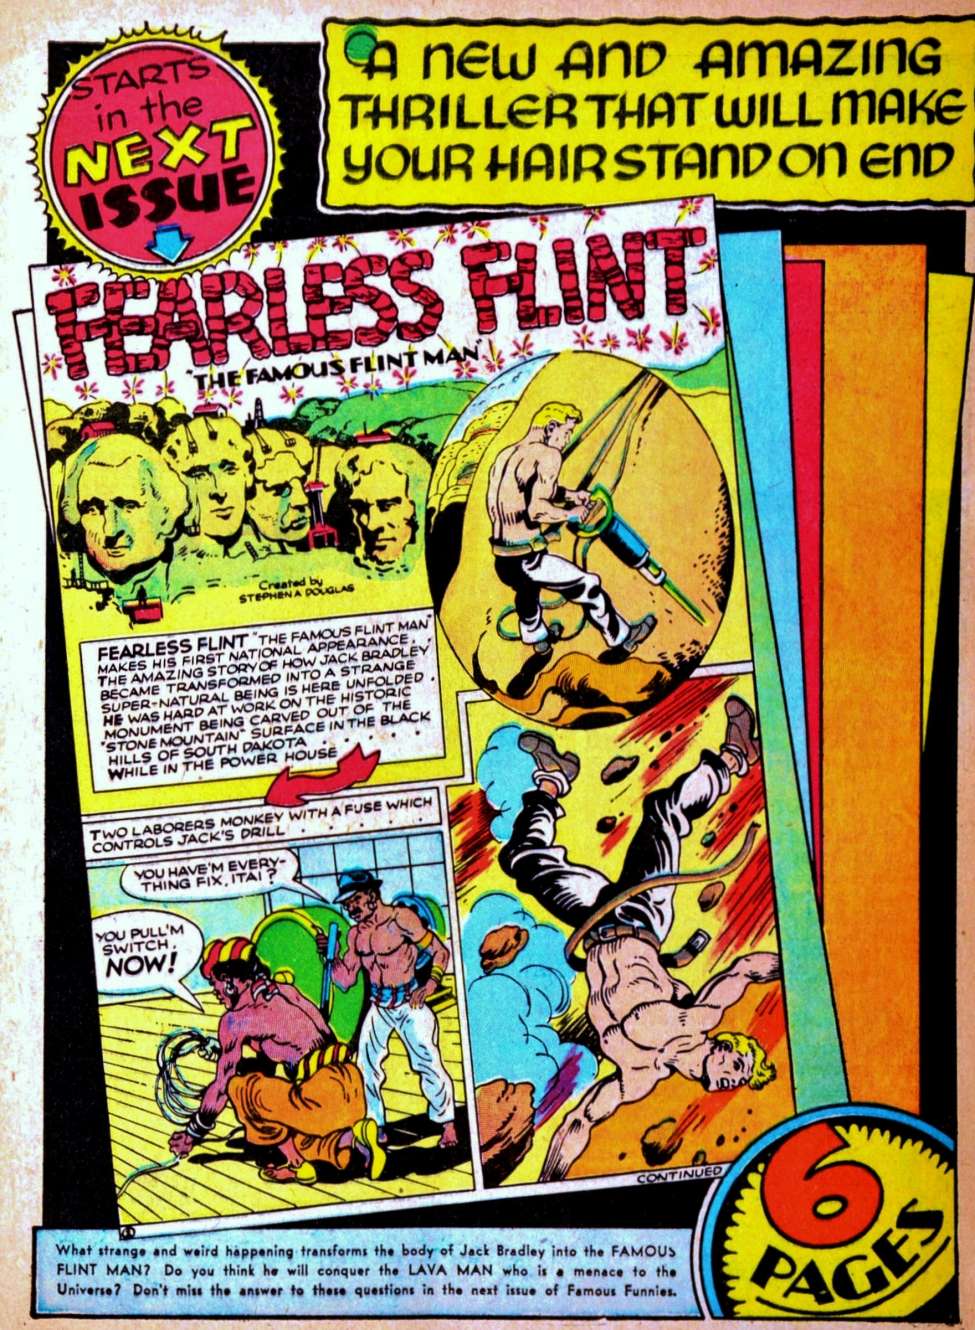 Book Cover For Fearless Flint The Famous Flint Man - Archives 1 of 3